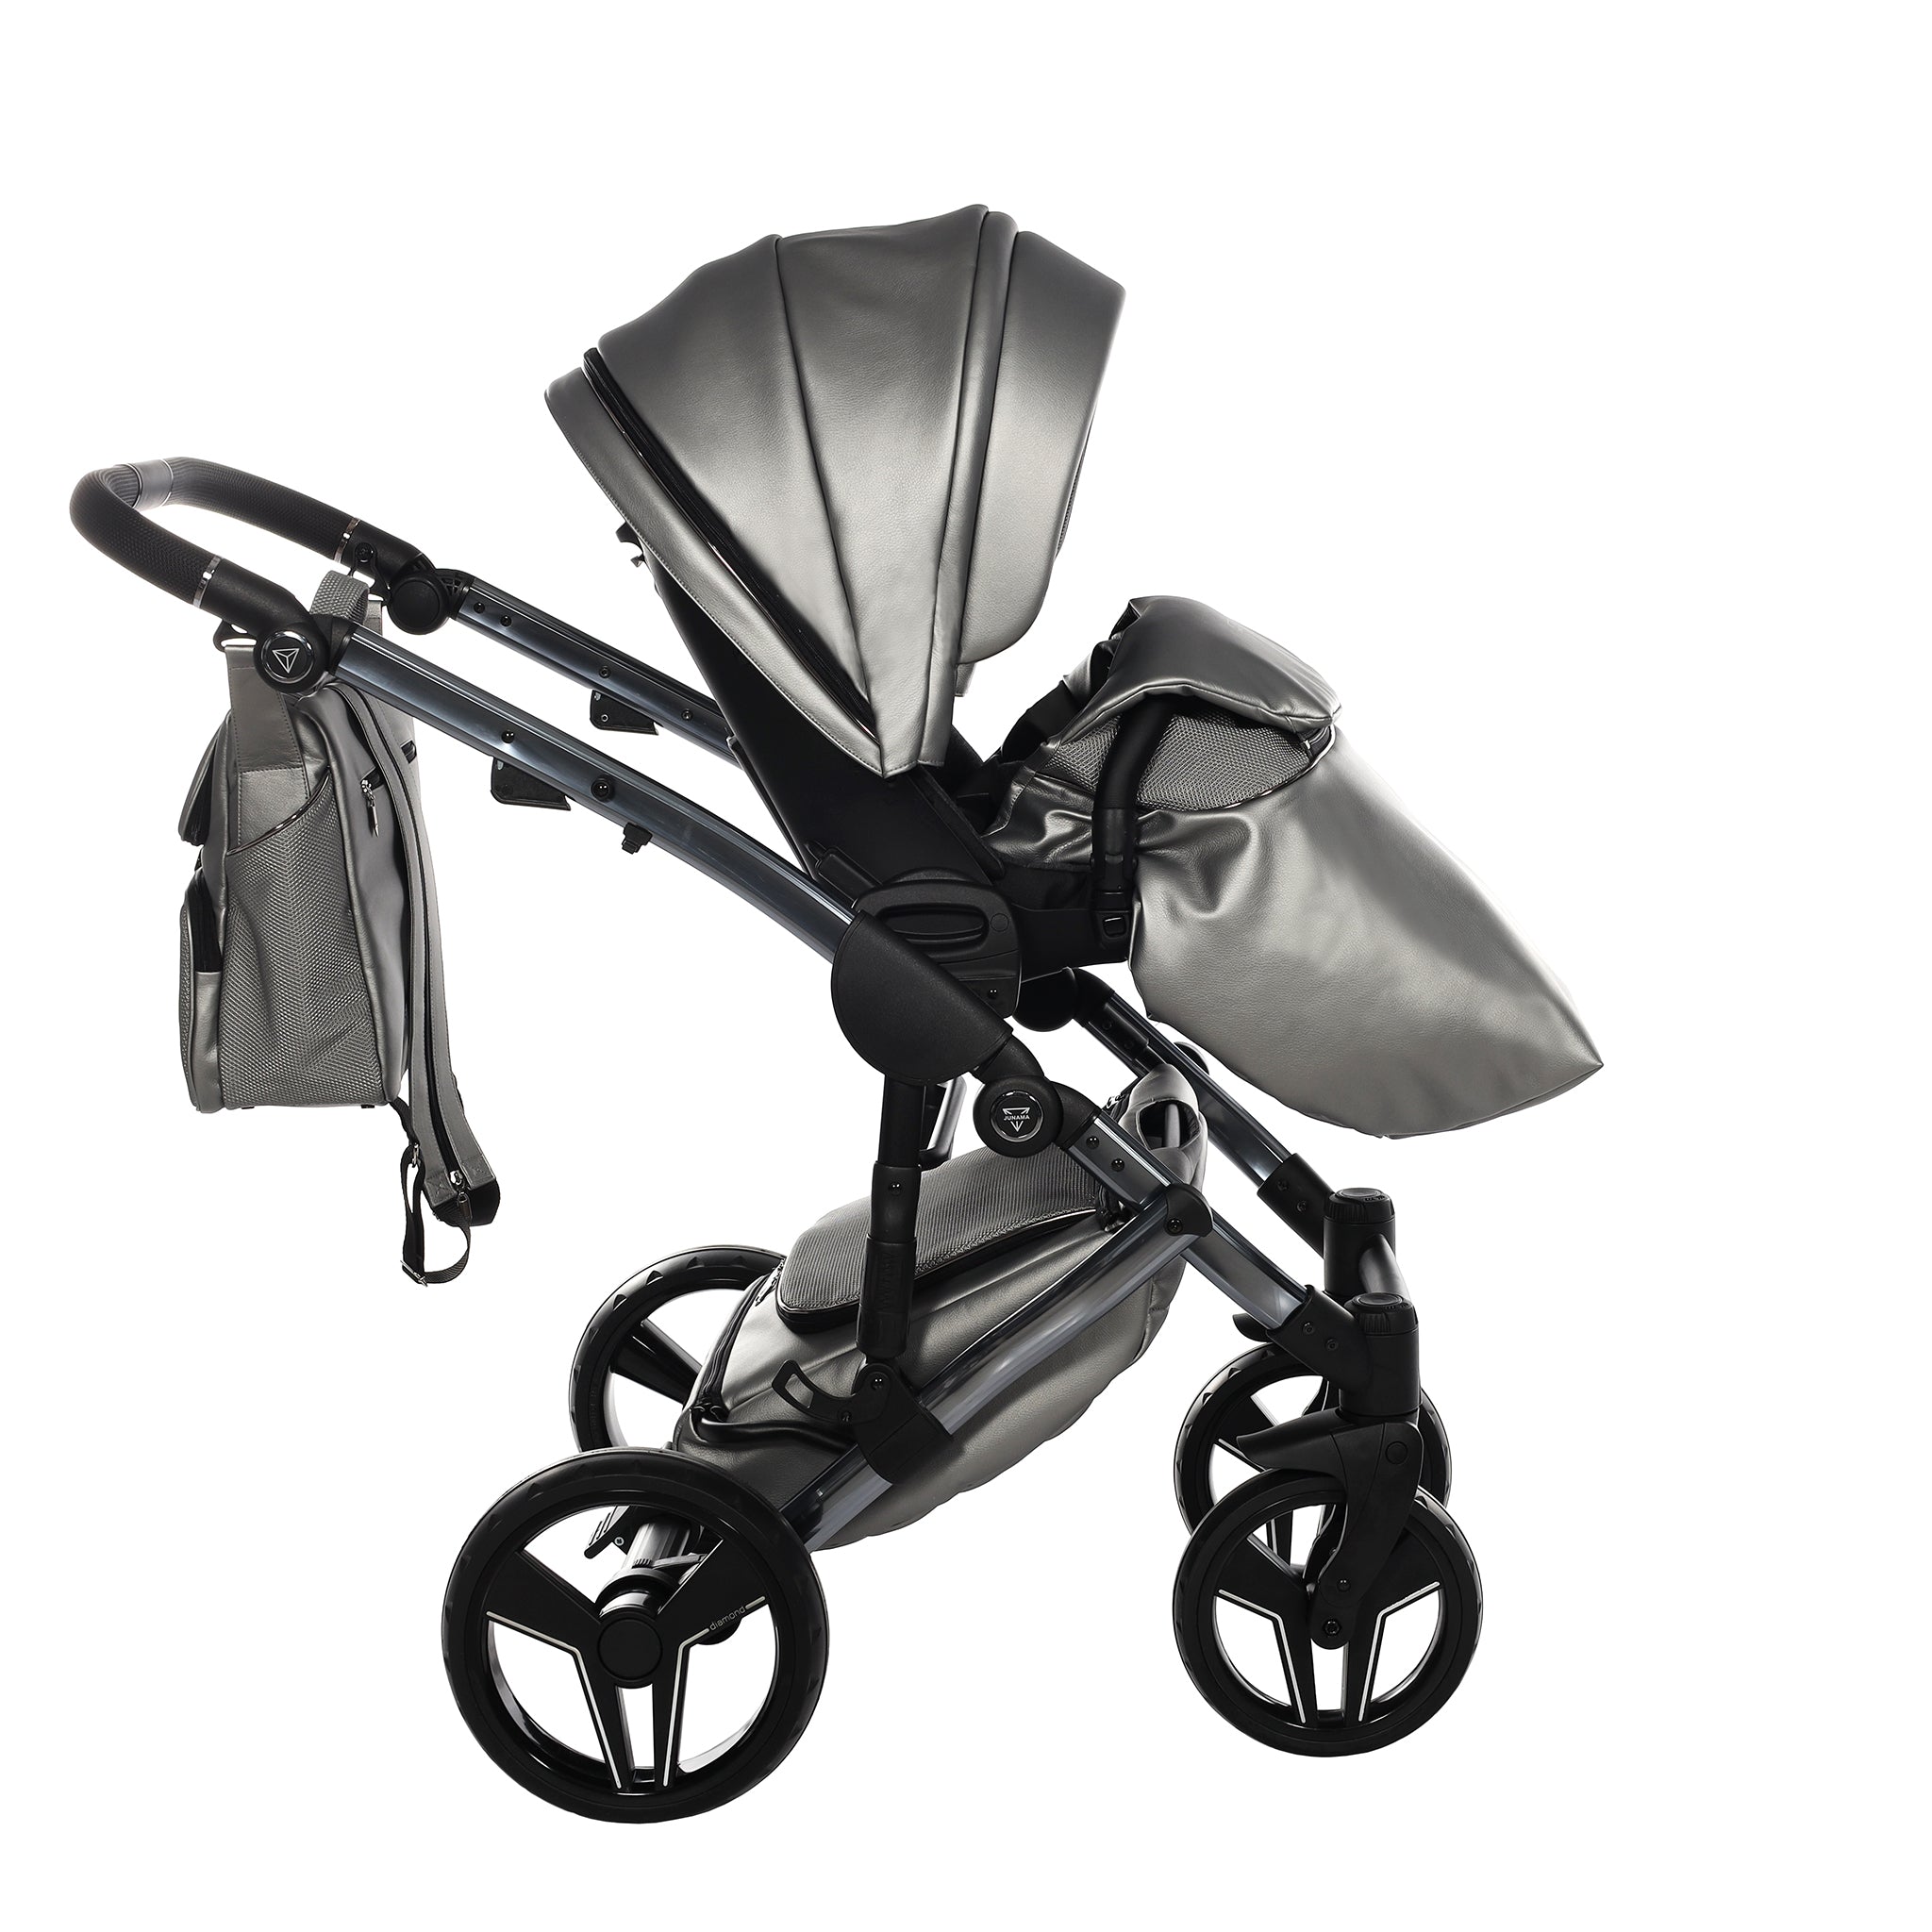 Junama S Class, baby prams or stroller 2 in 1 - Silver and Black, Code number: JUNSC09